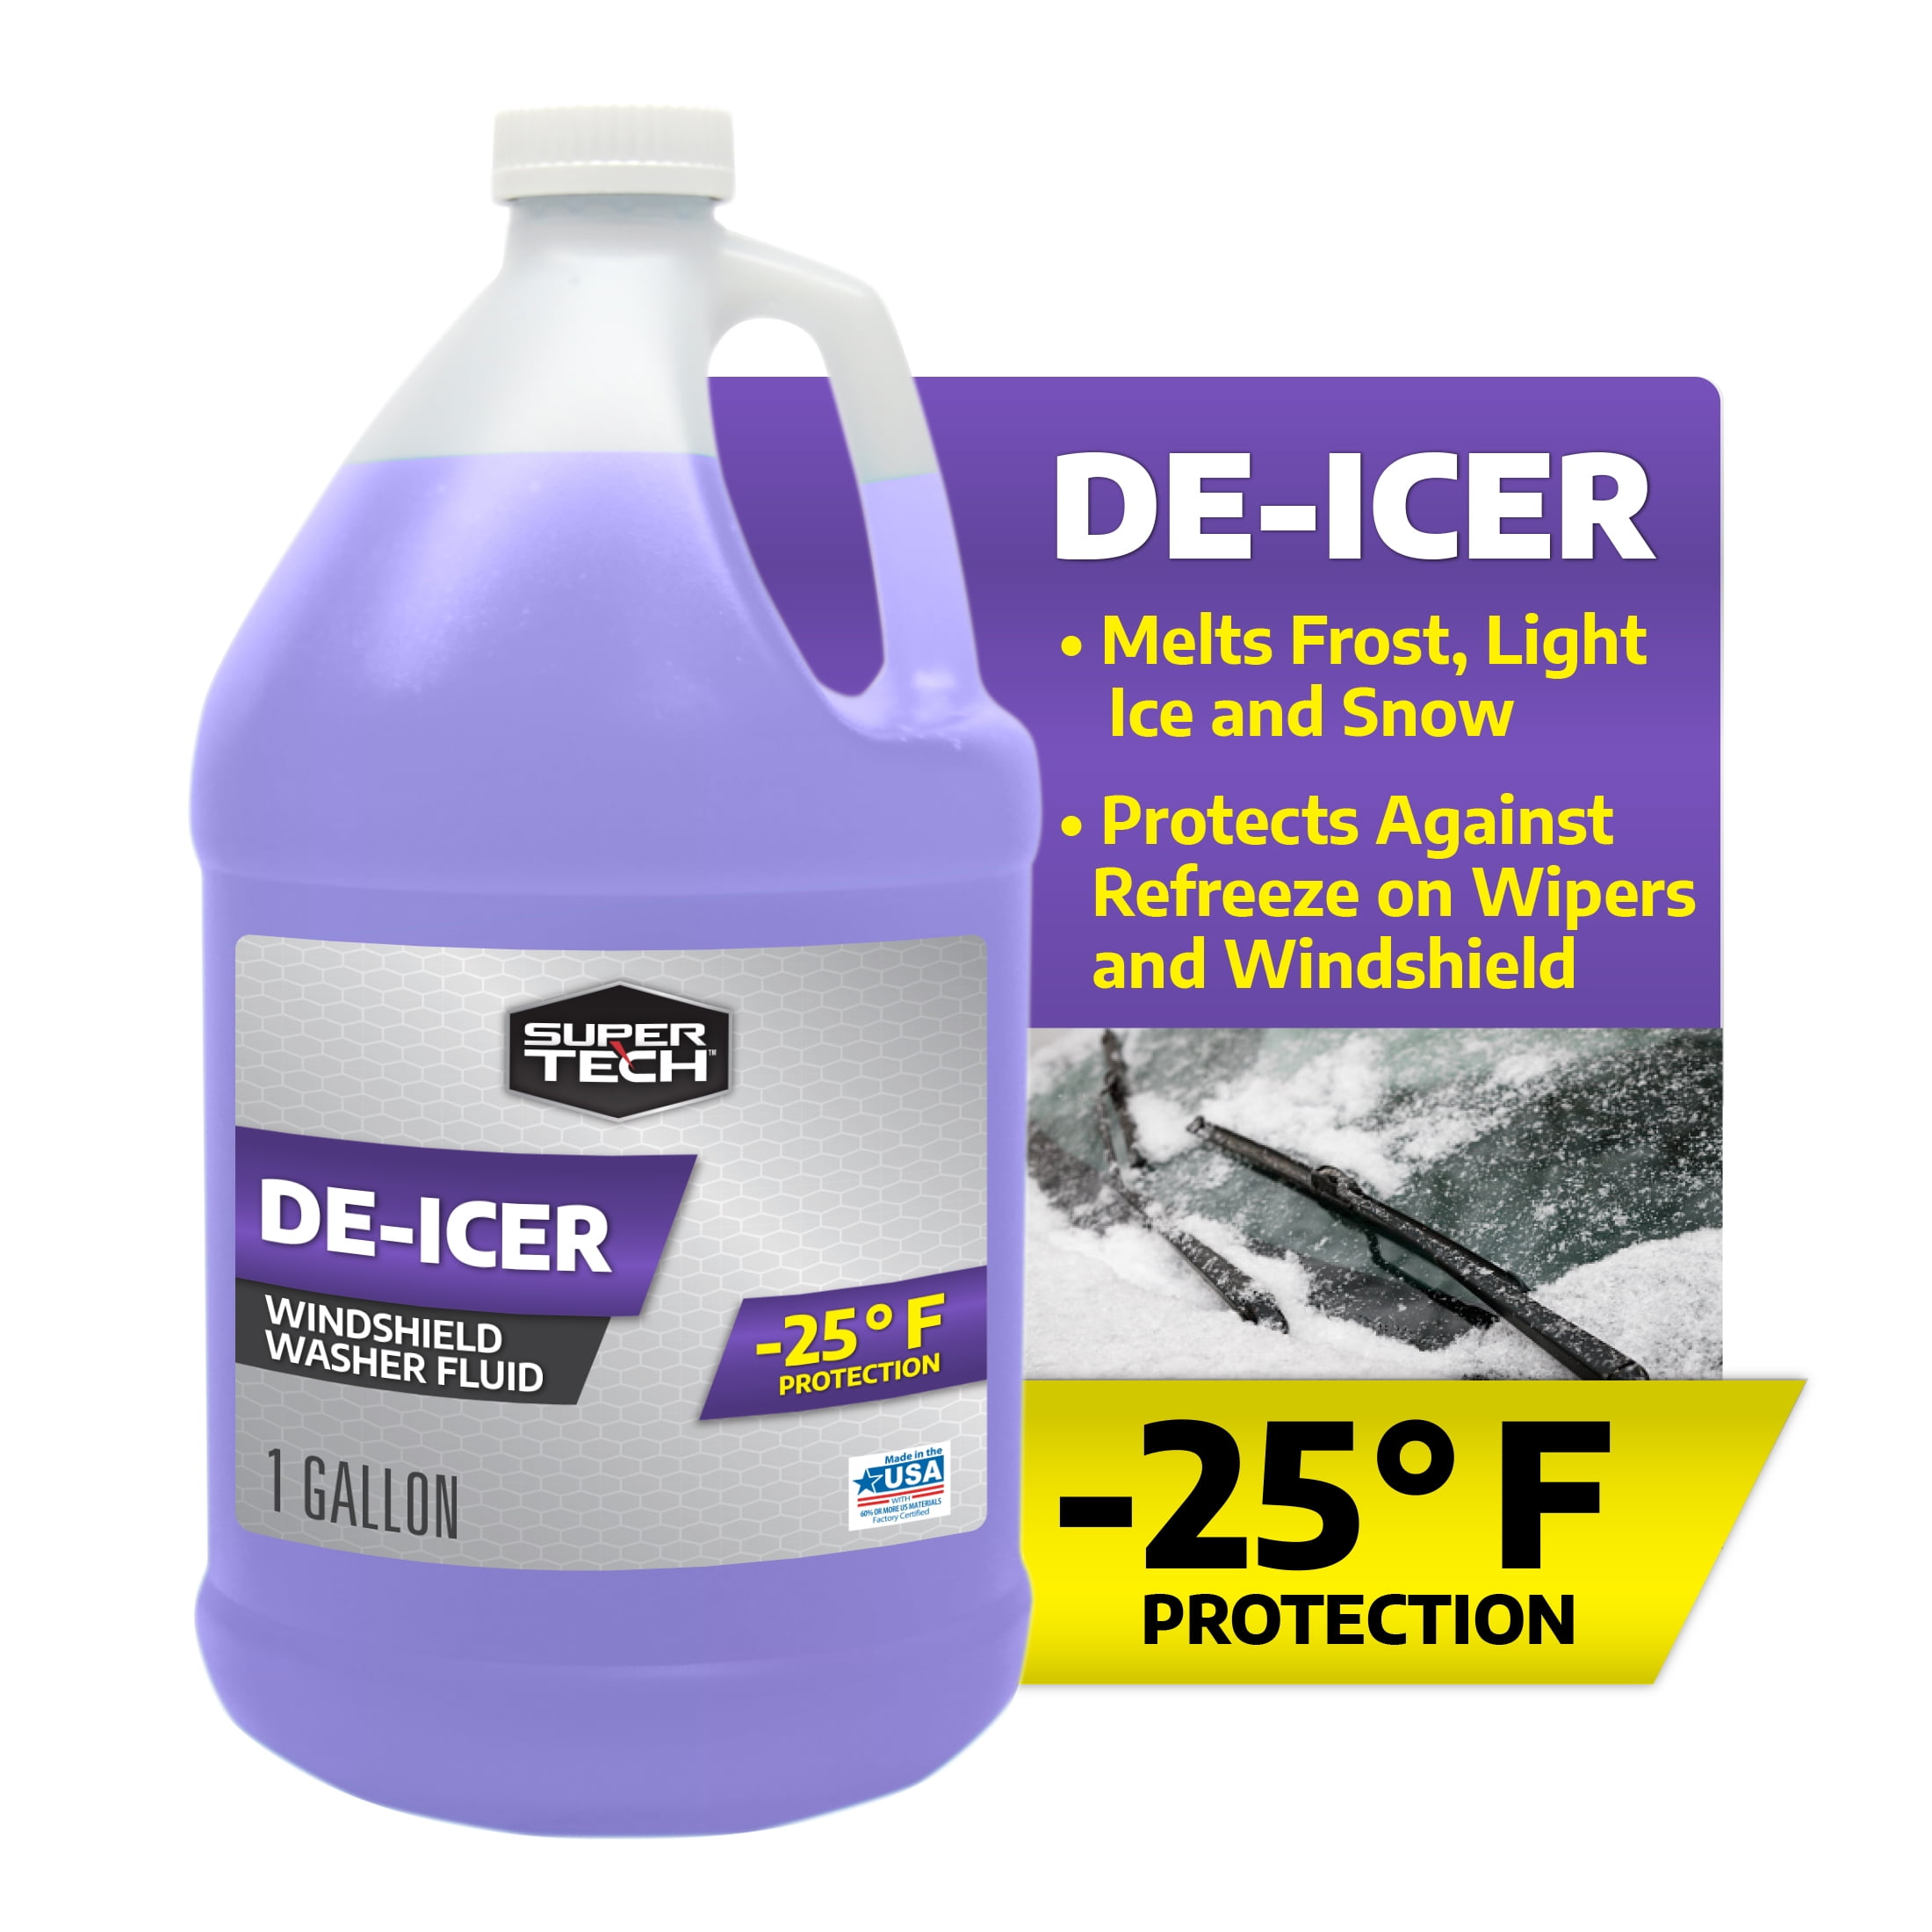 Zecol 1-Gallon De-Icer Windshield Washer Fluid at